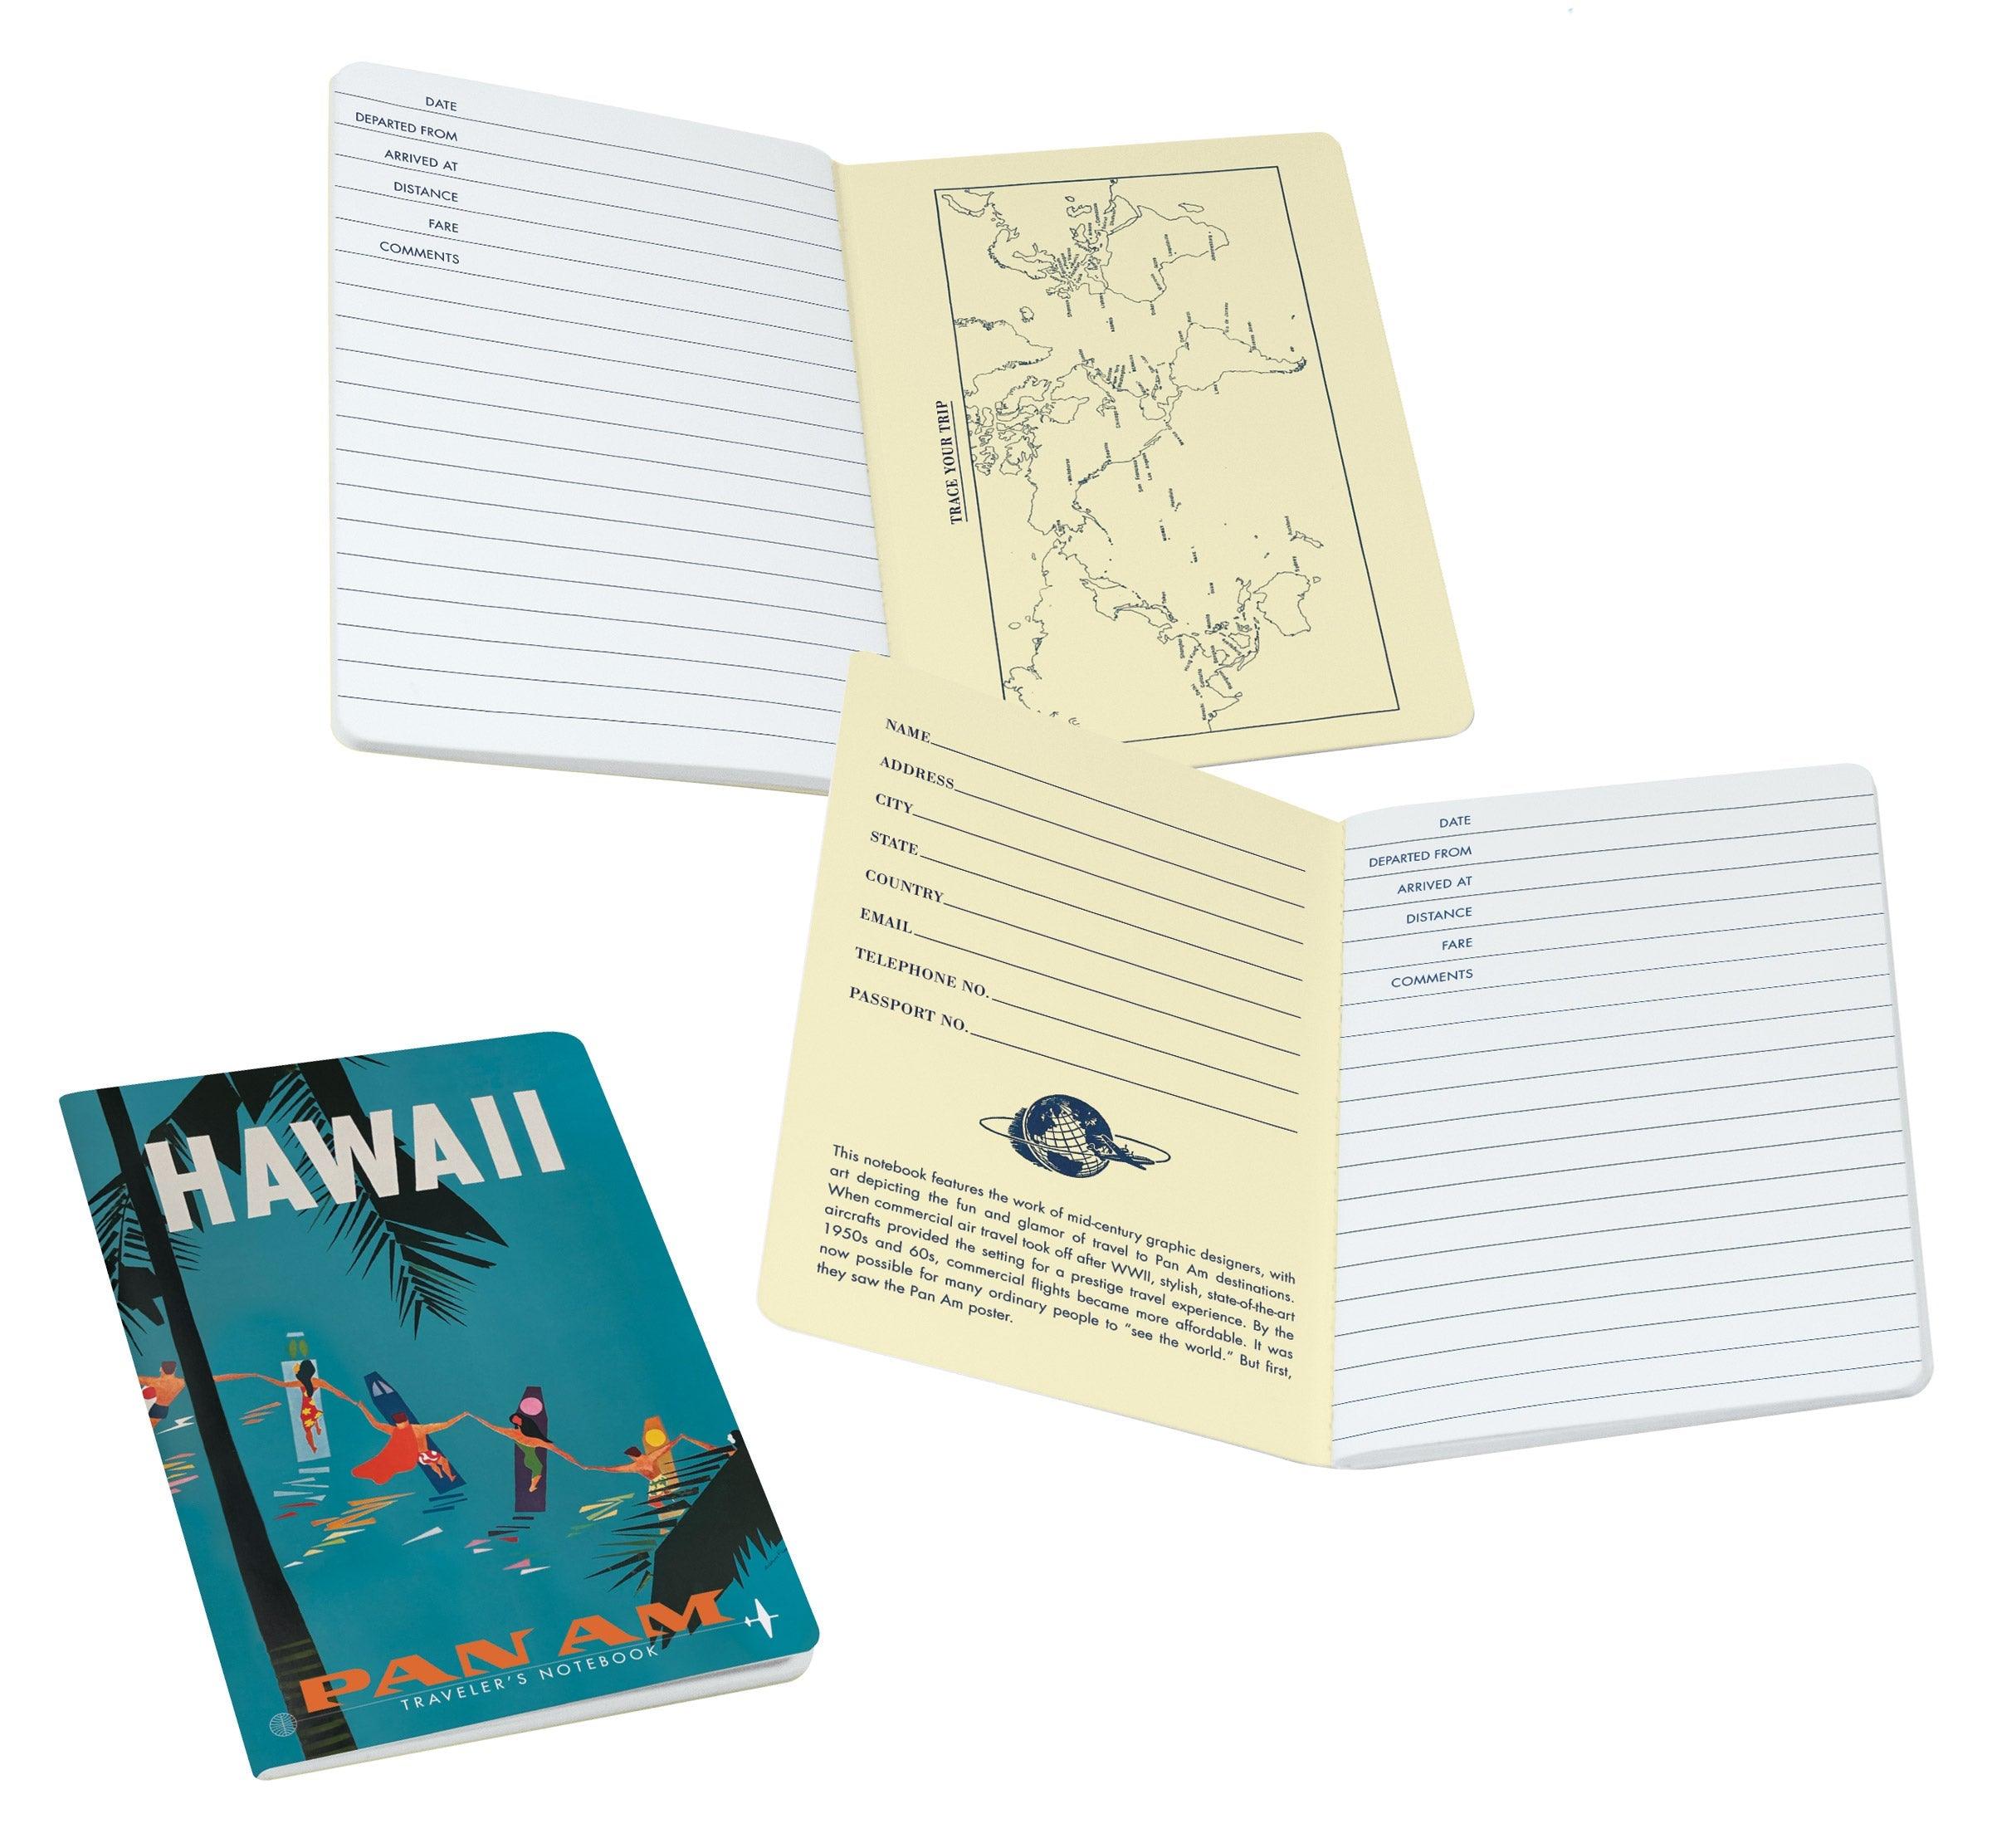 Product photo of Pan Am Hawaii Notebook, a novelty gift manufactured by The Unemployed Philosophers Guild.